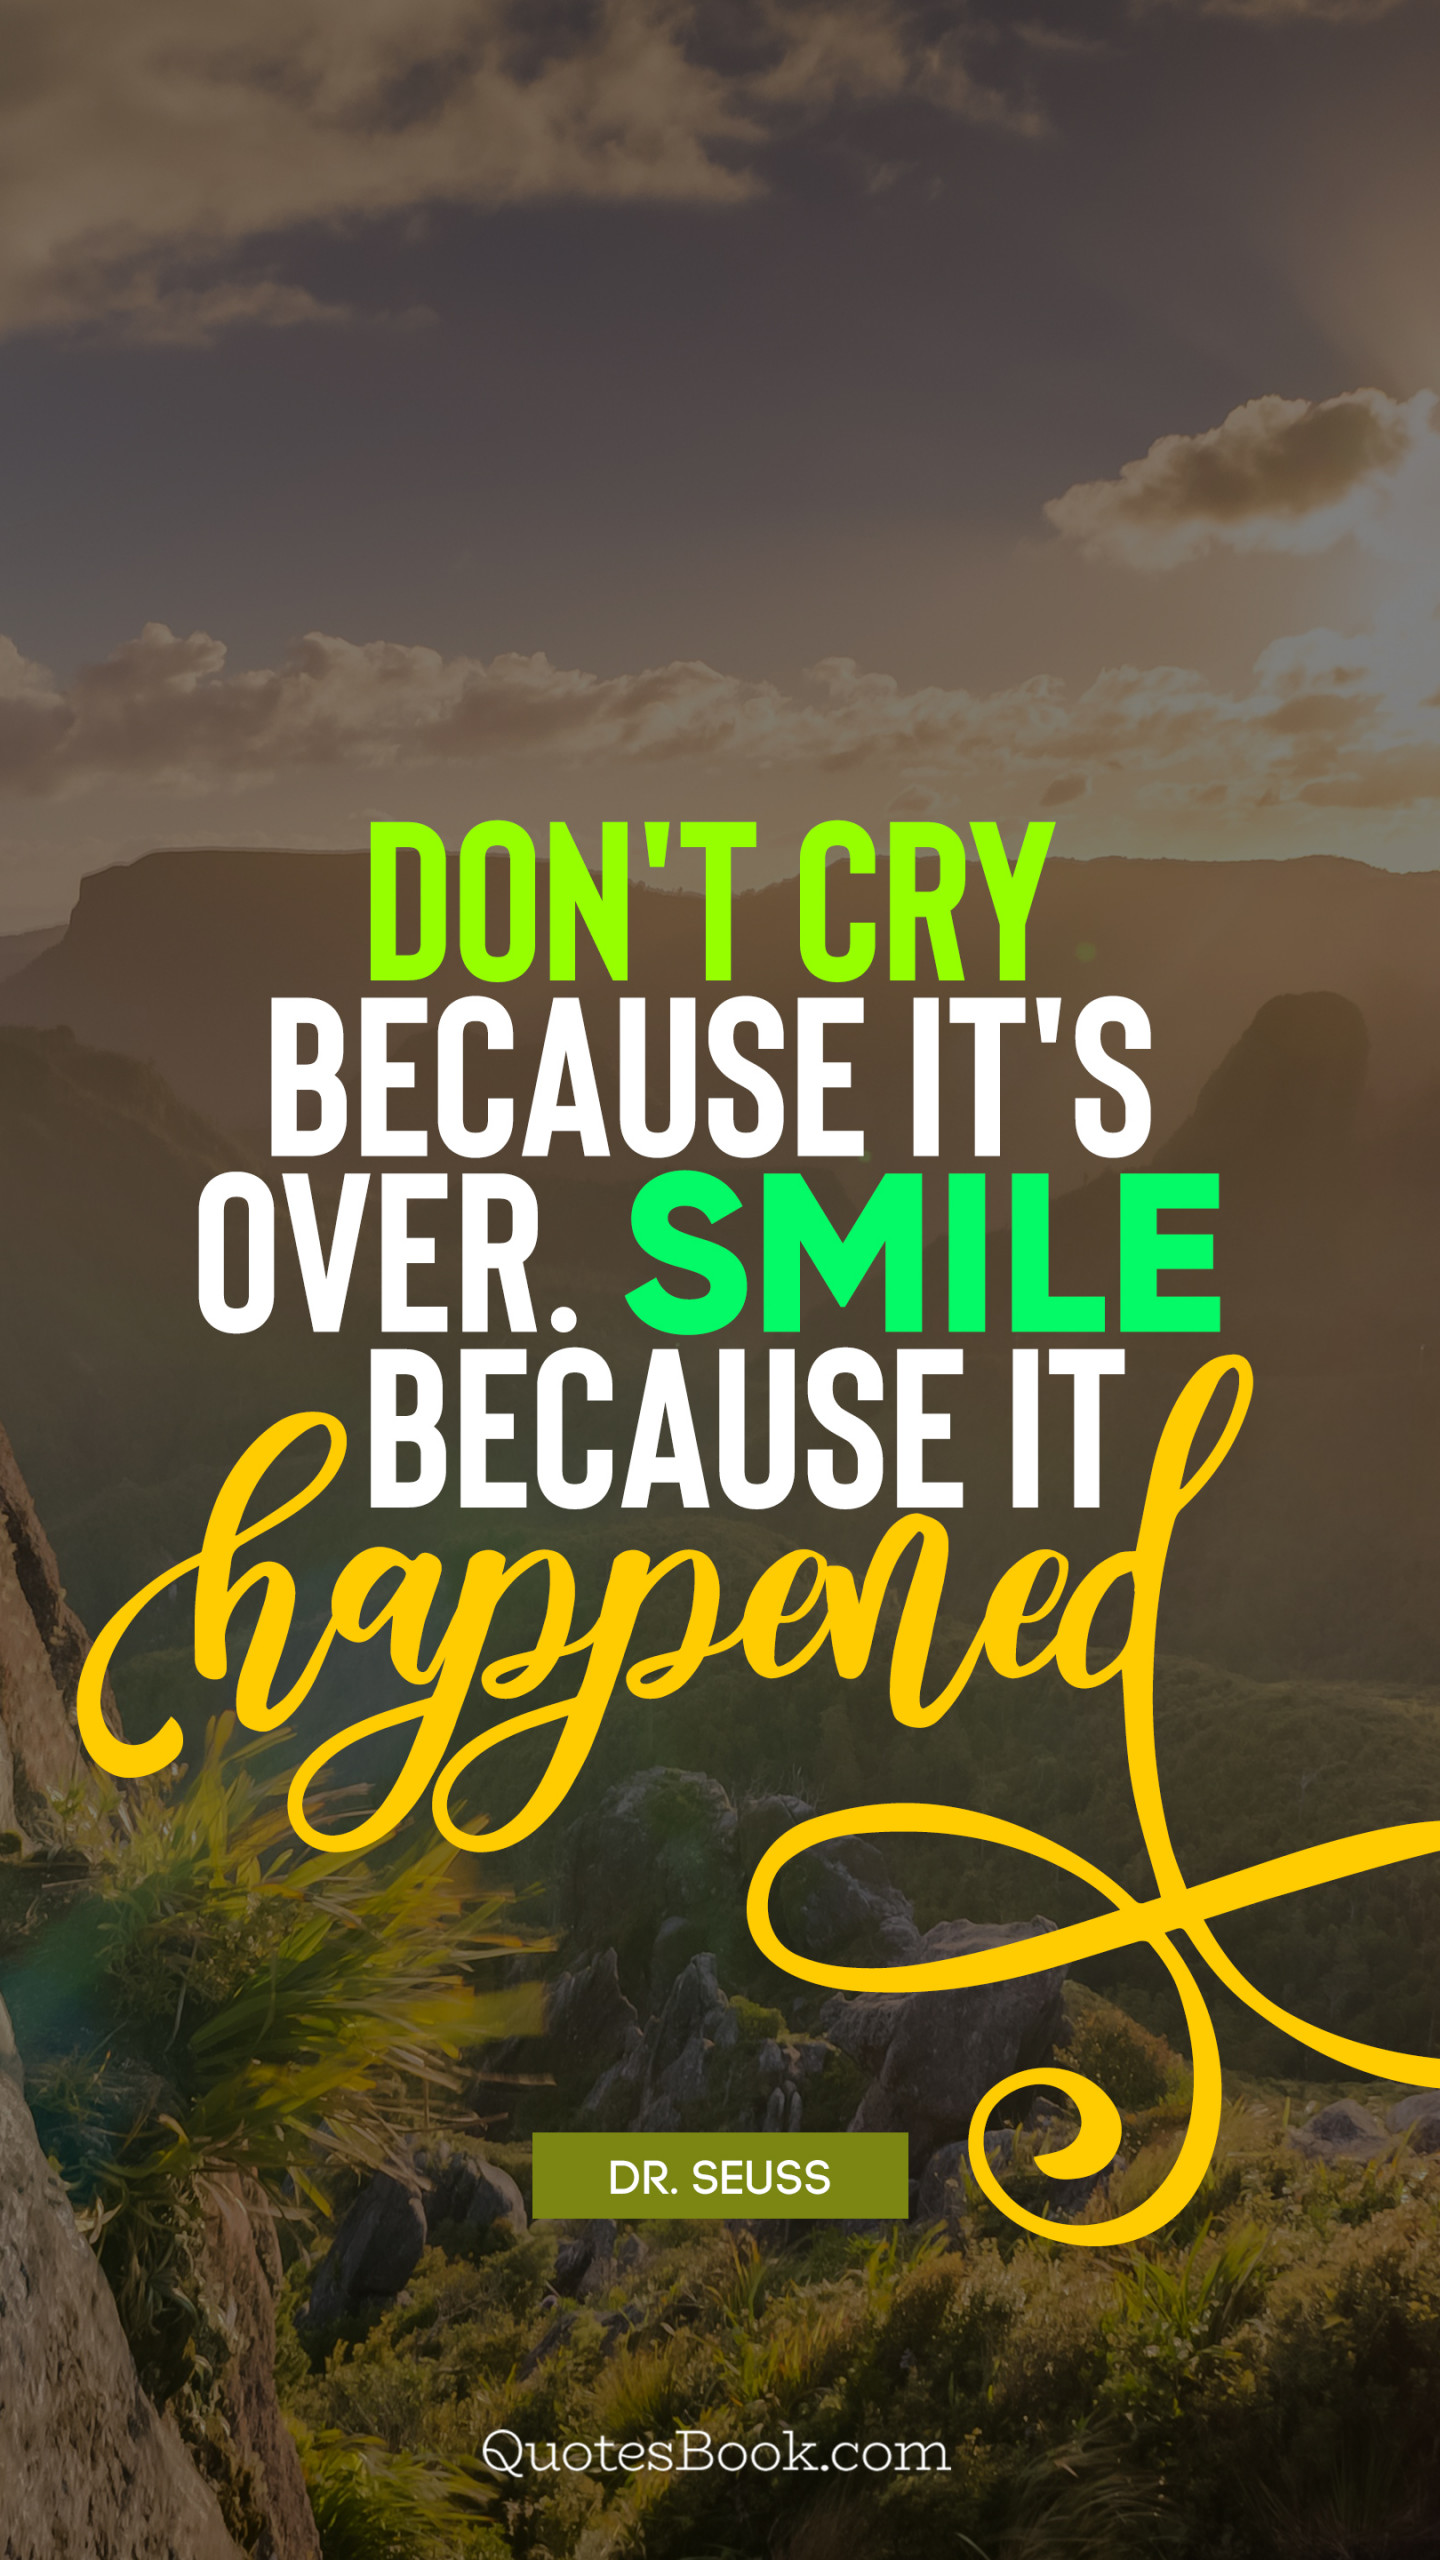 Don't cry because it's over. Smile because it happened. - Quote by Dr